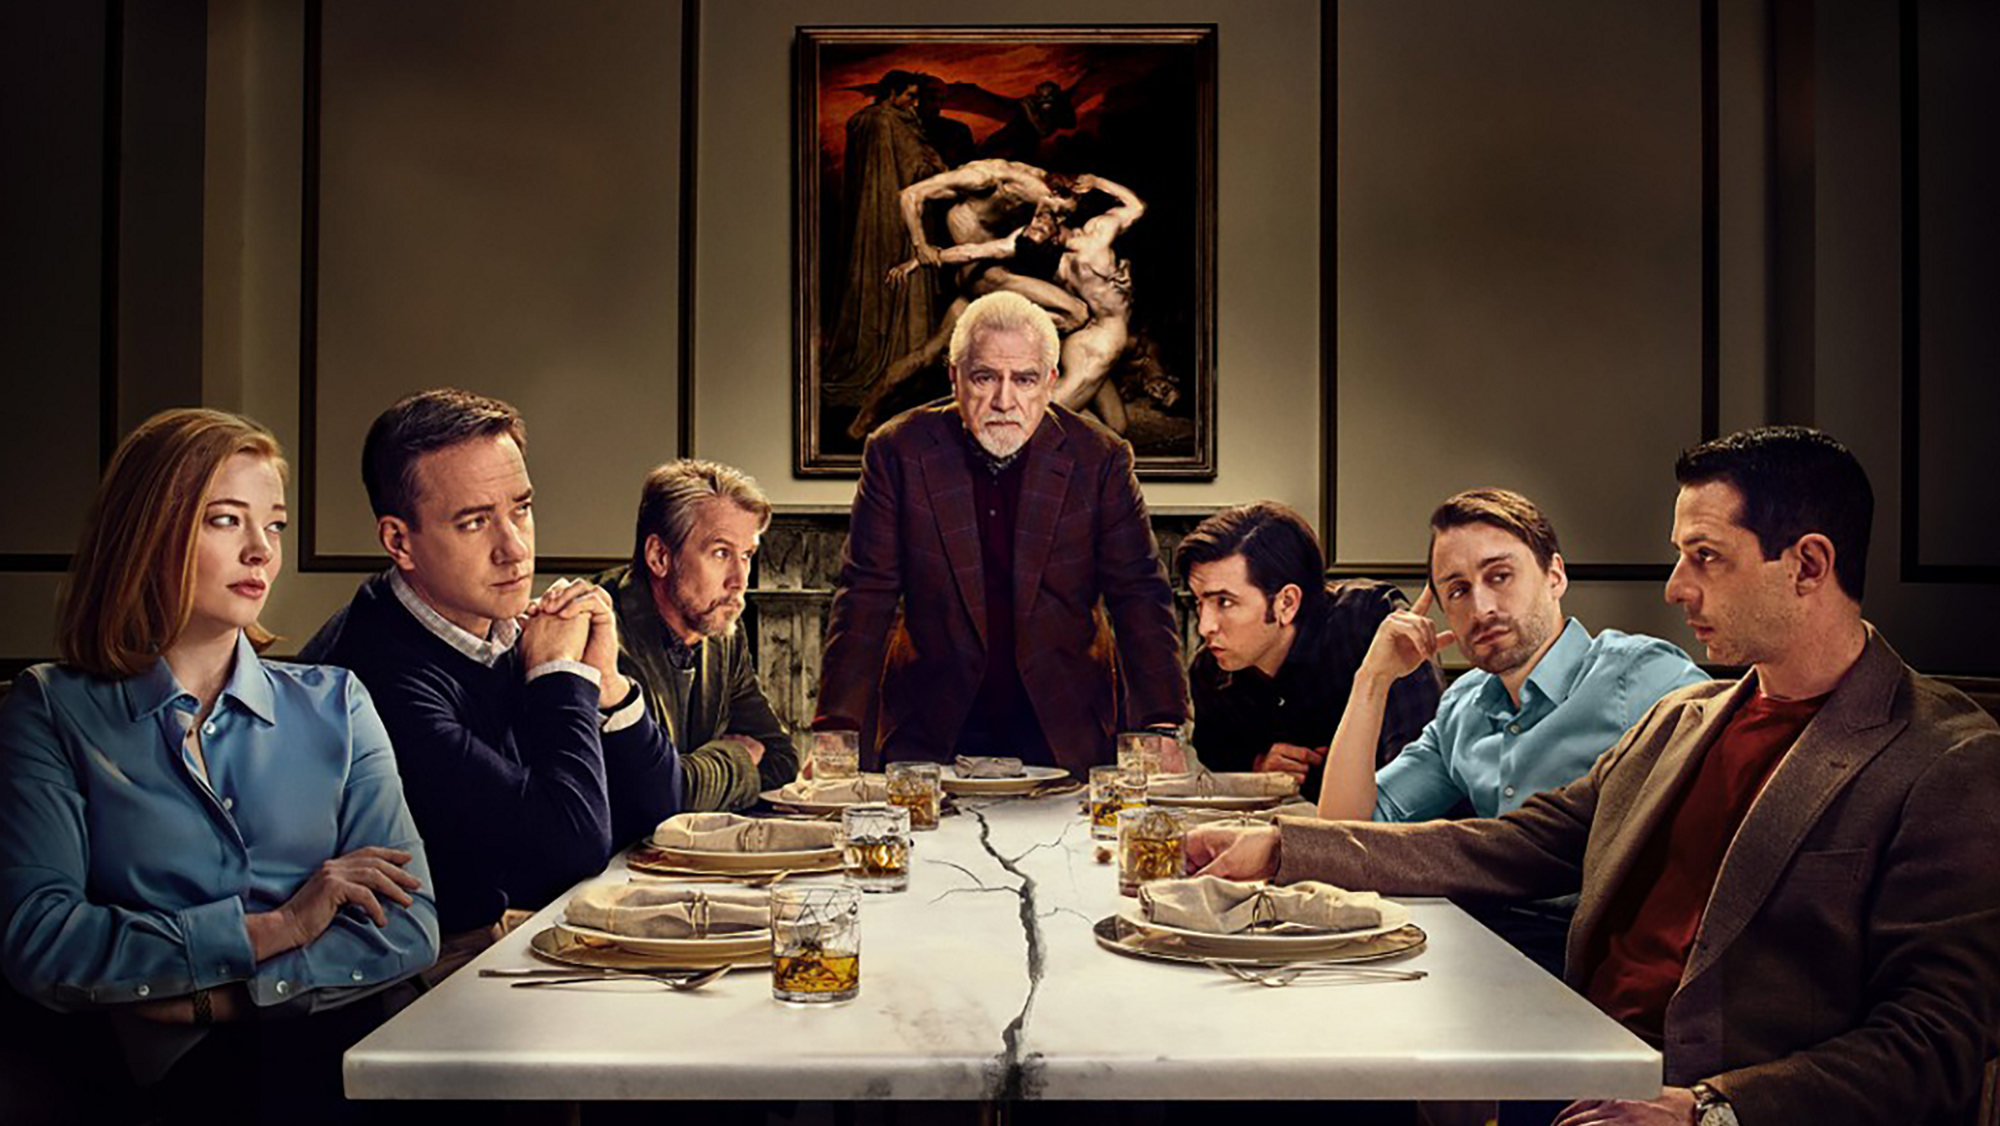 Main characters from Succession sat around a dinner table